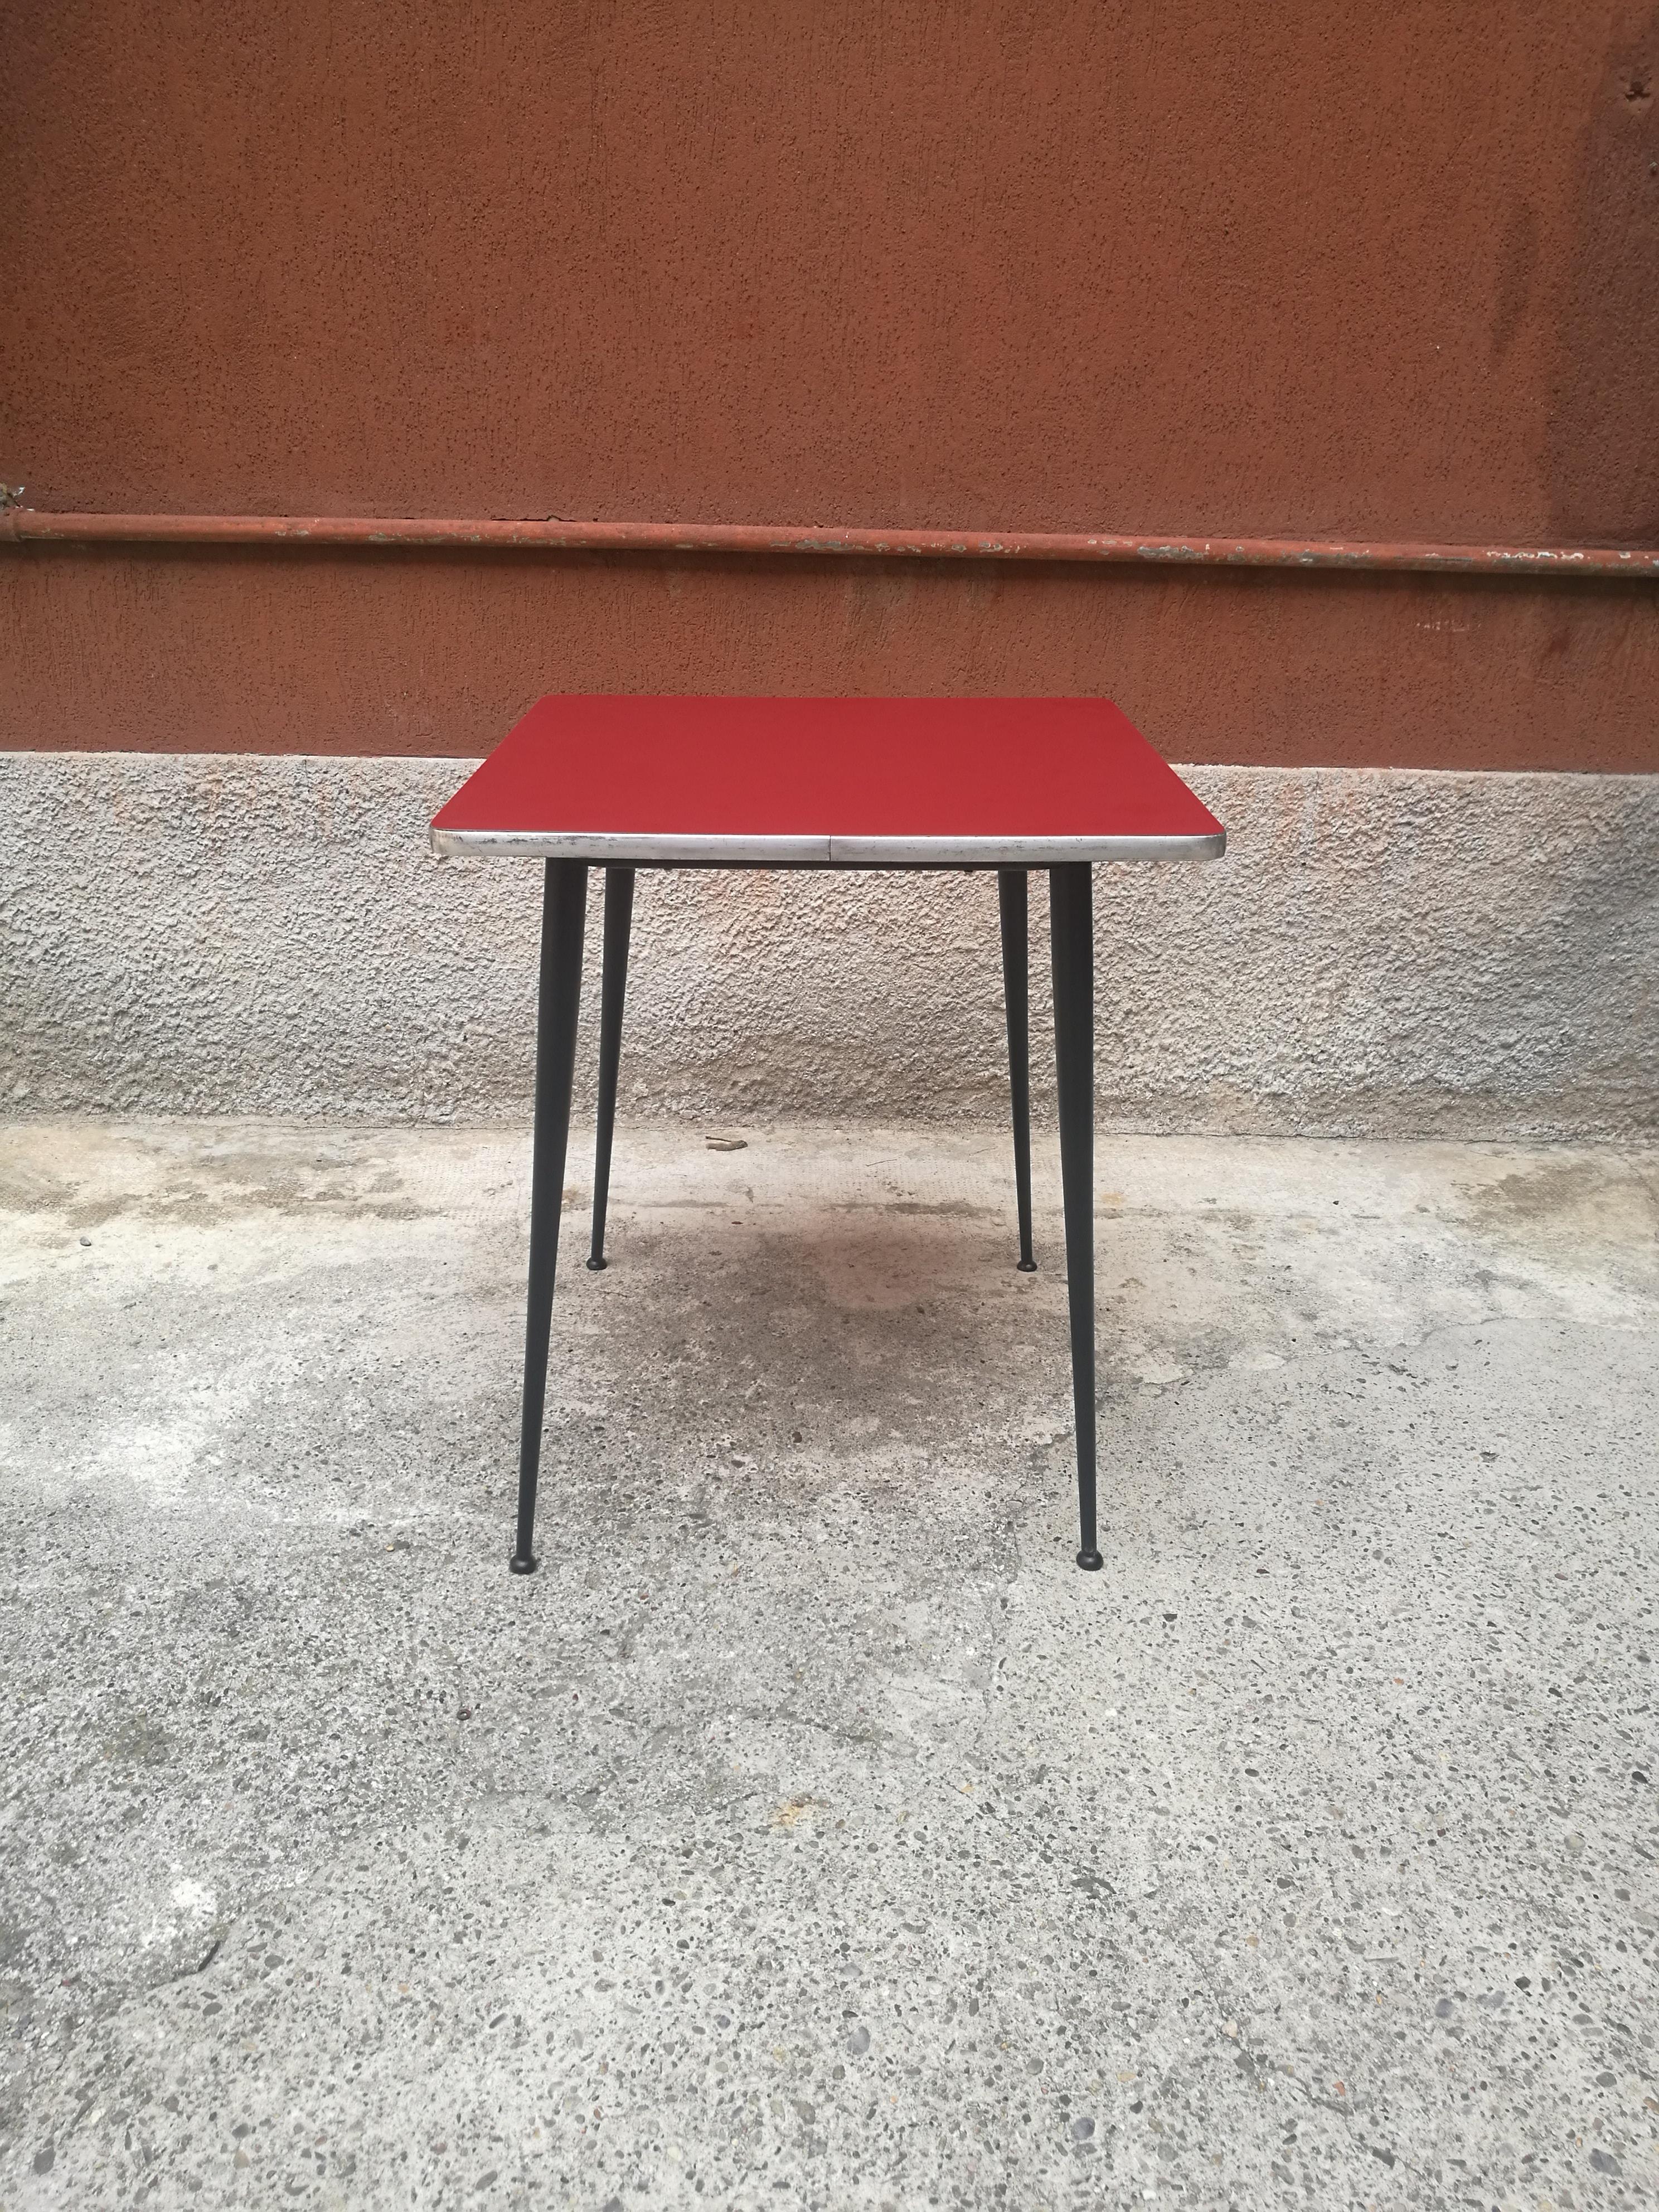 Midcentury Italian squared red formica ad metal table from 1960s
Table of Italian production, from 1960s, with red formica table top, chromed on the border, with four black metal legs. The dark red and the rounded angles diversify a kind of